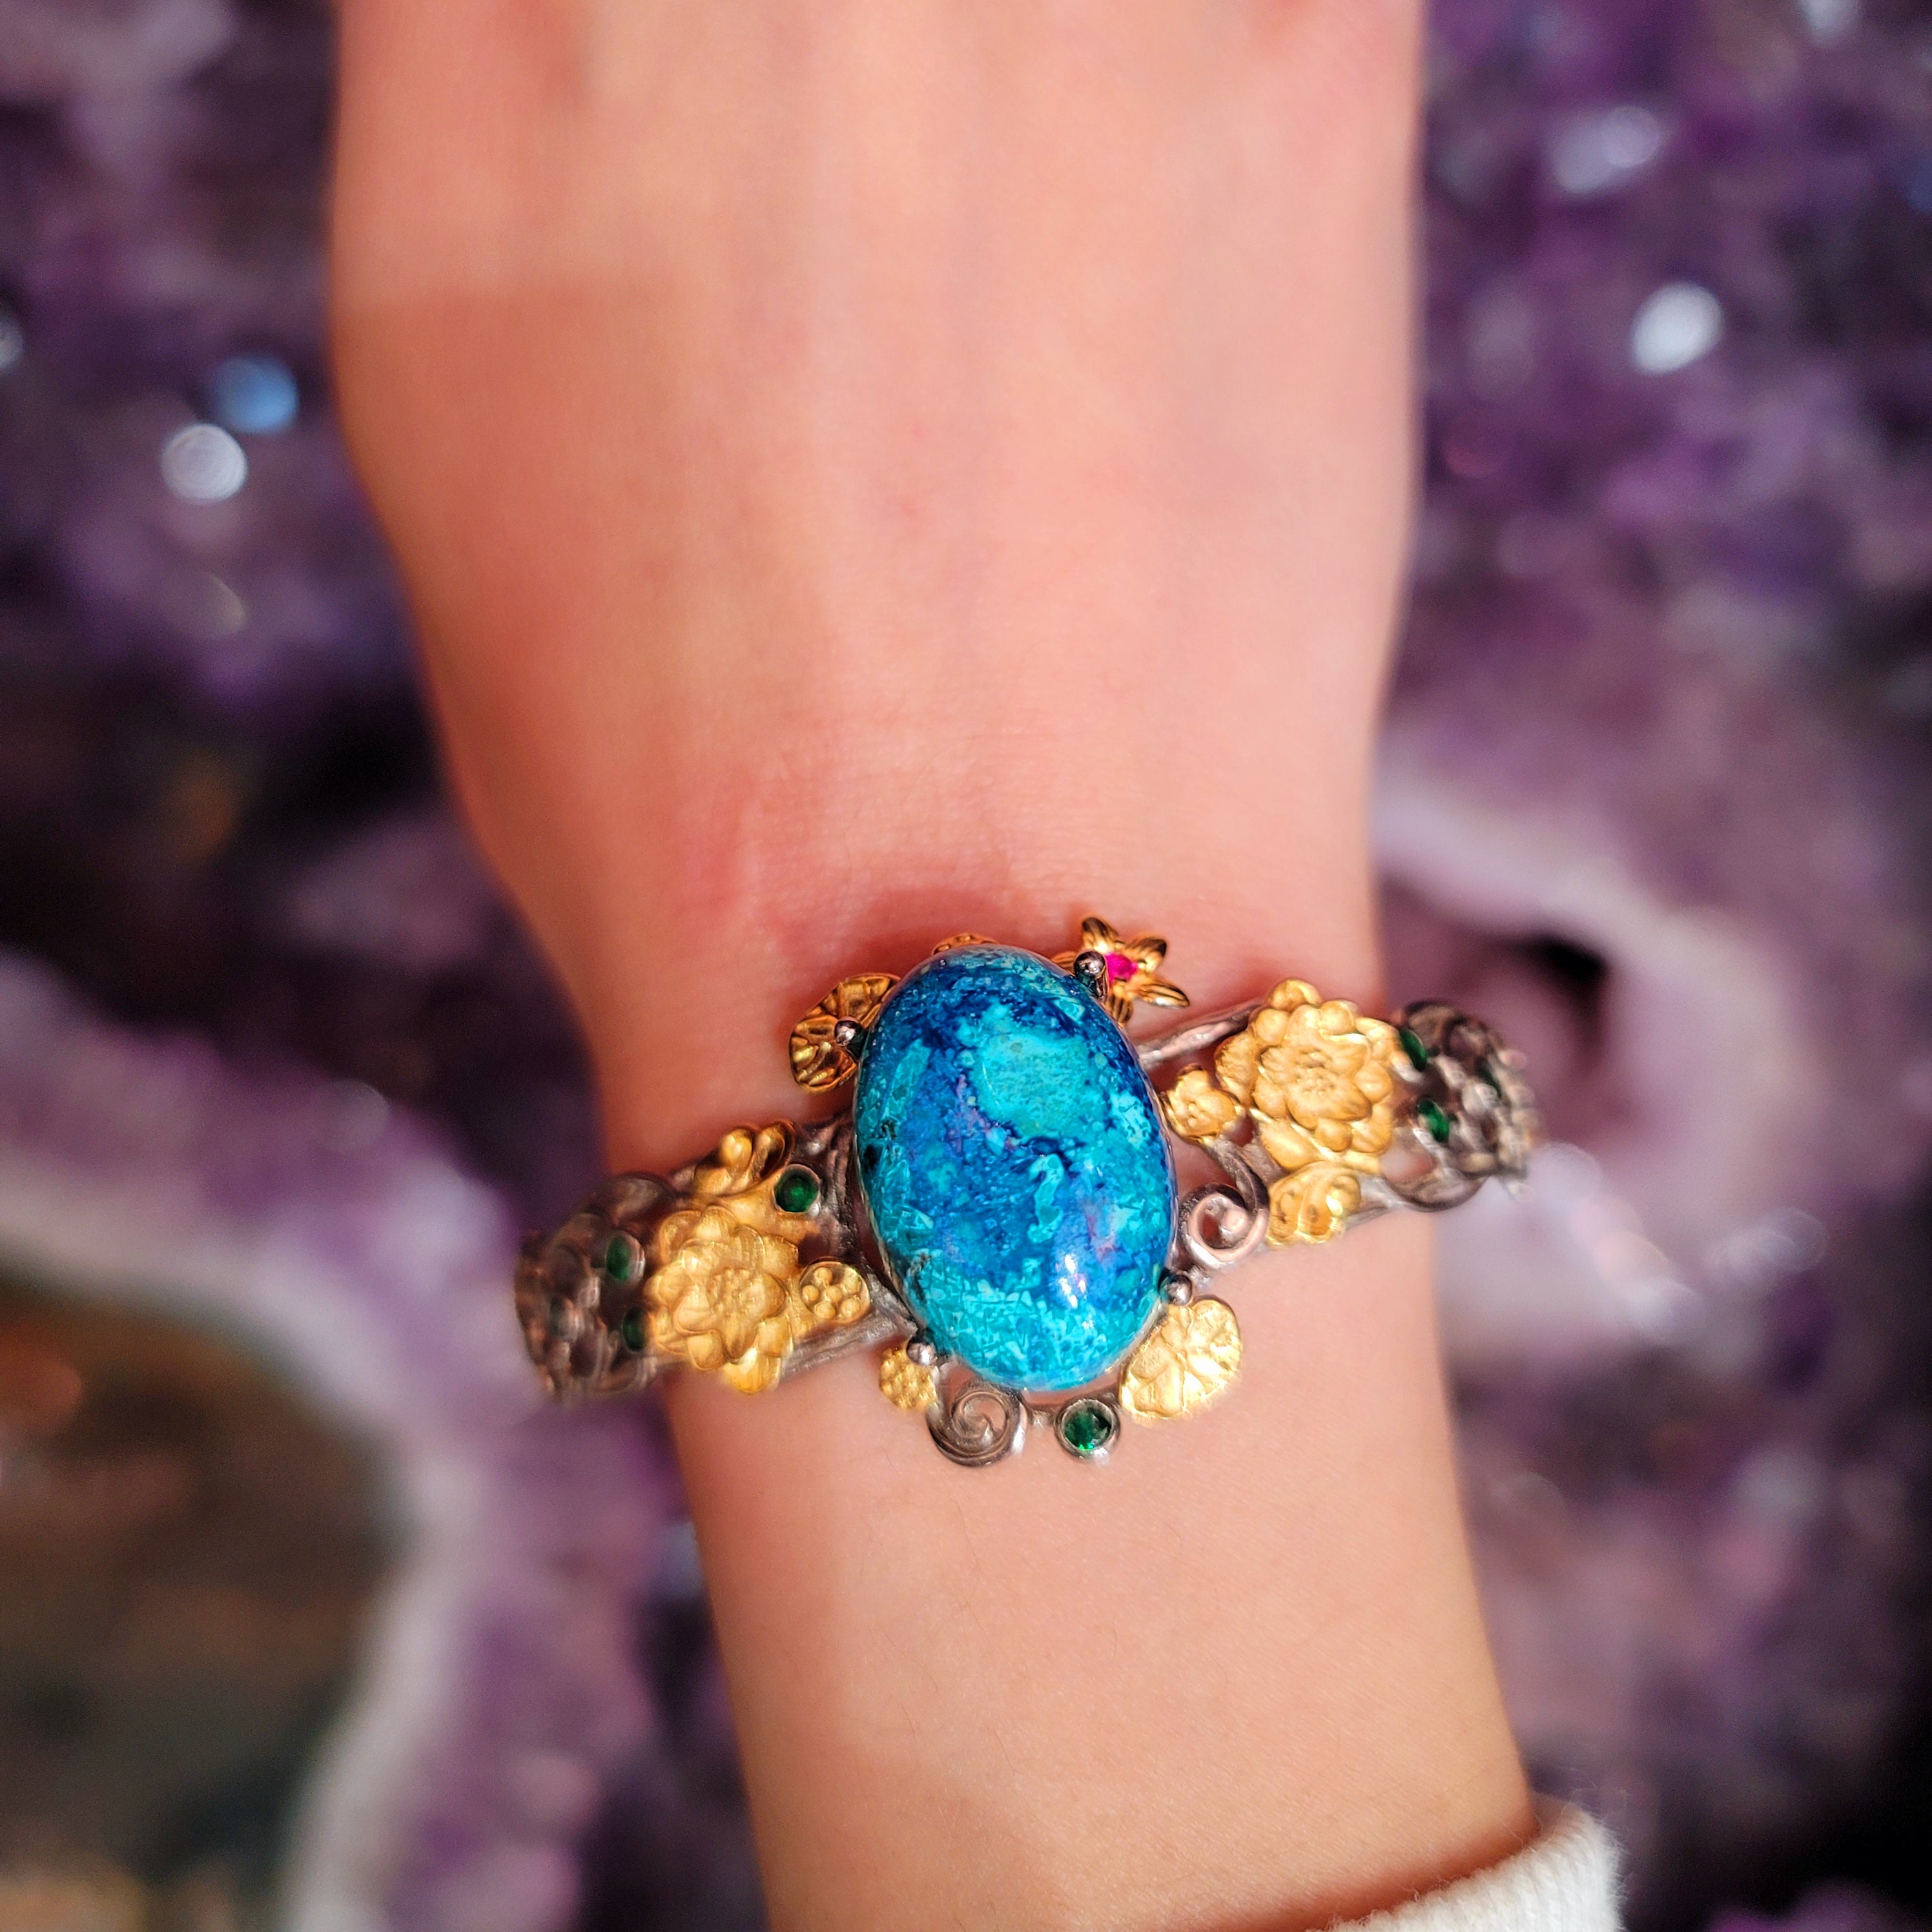 Deep Blue Shattuckite With Chrysocolla Enchanted Bracelet Cuff for Peaceful Communication and Truth